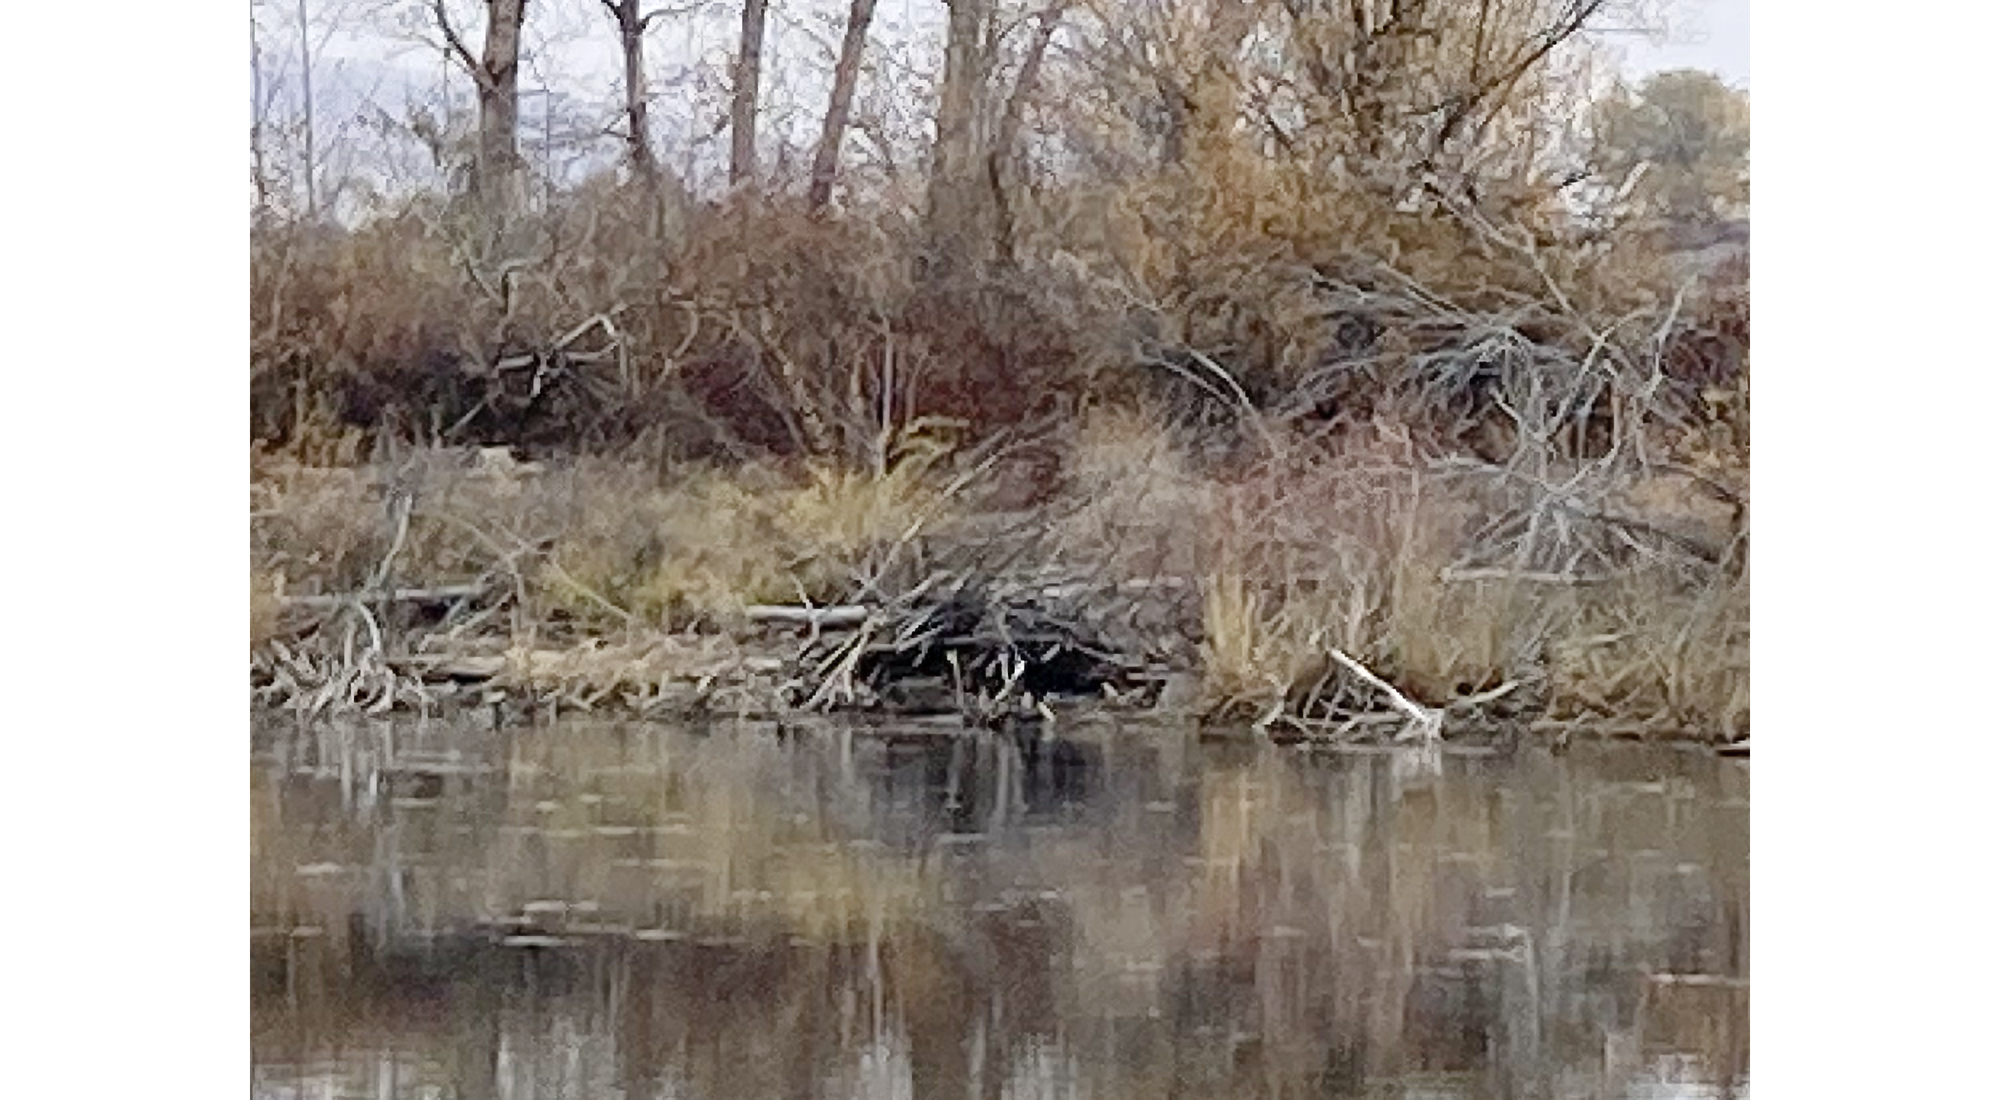 Photo of beaver lodge by pond underneath trees in autumn